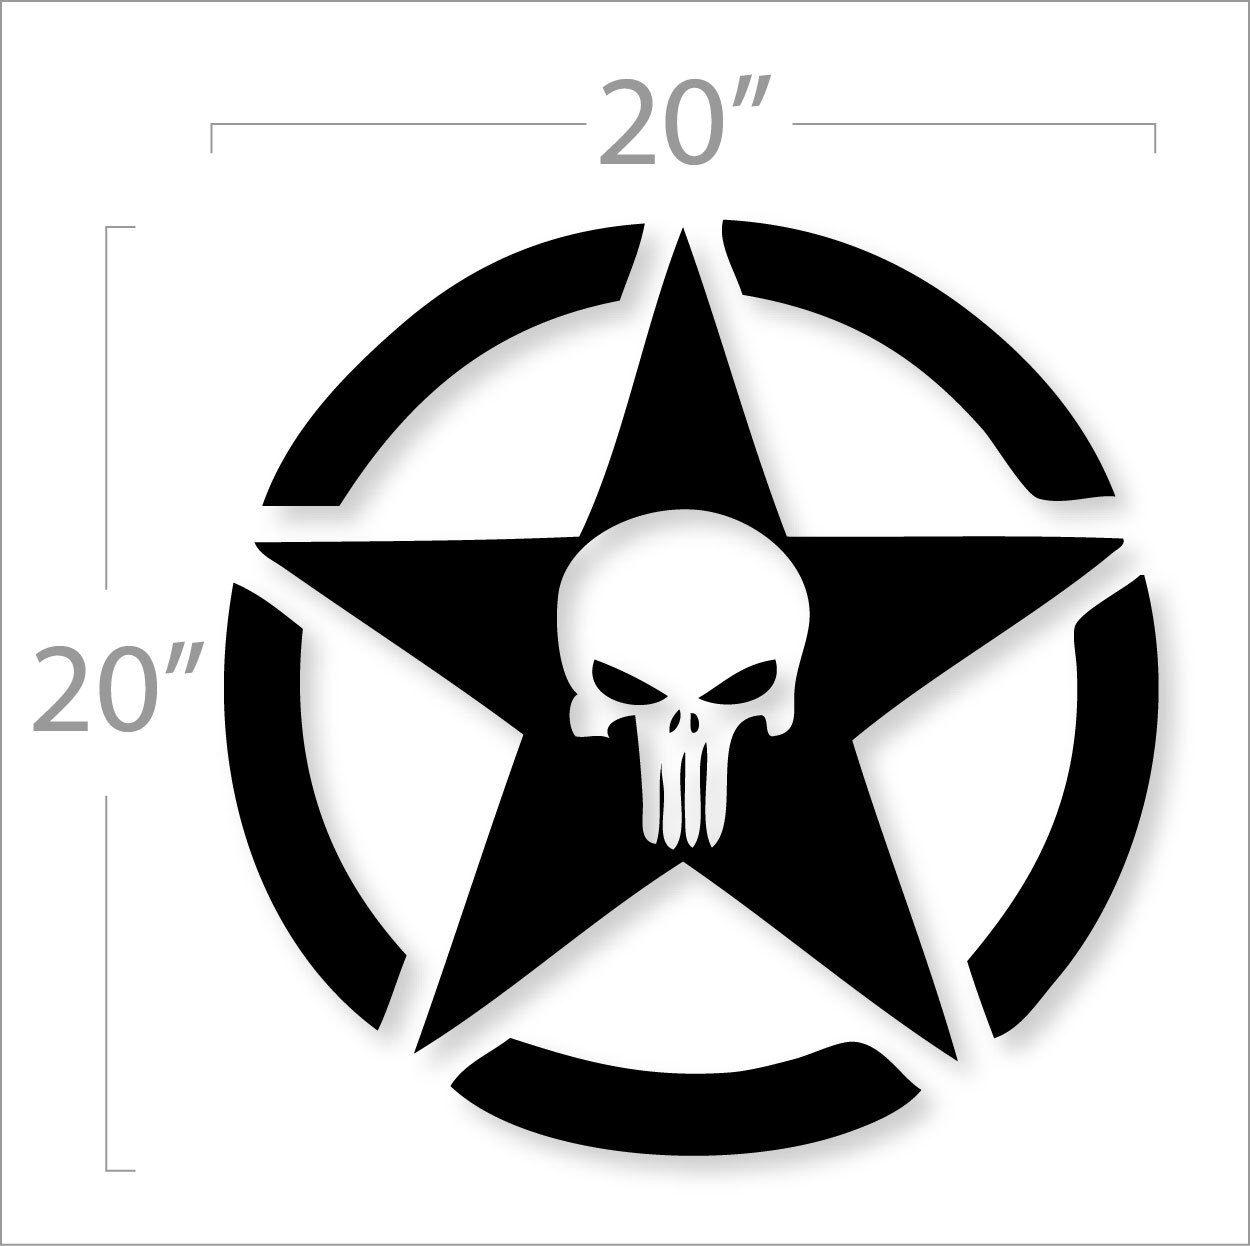 Jeep Star Logo - JEEP Punisher military star logo design decal sticker | DECALS and ...